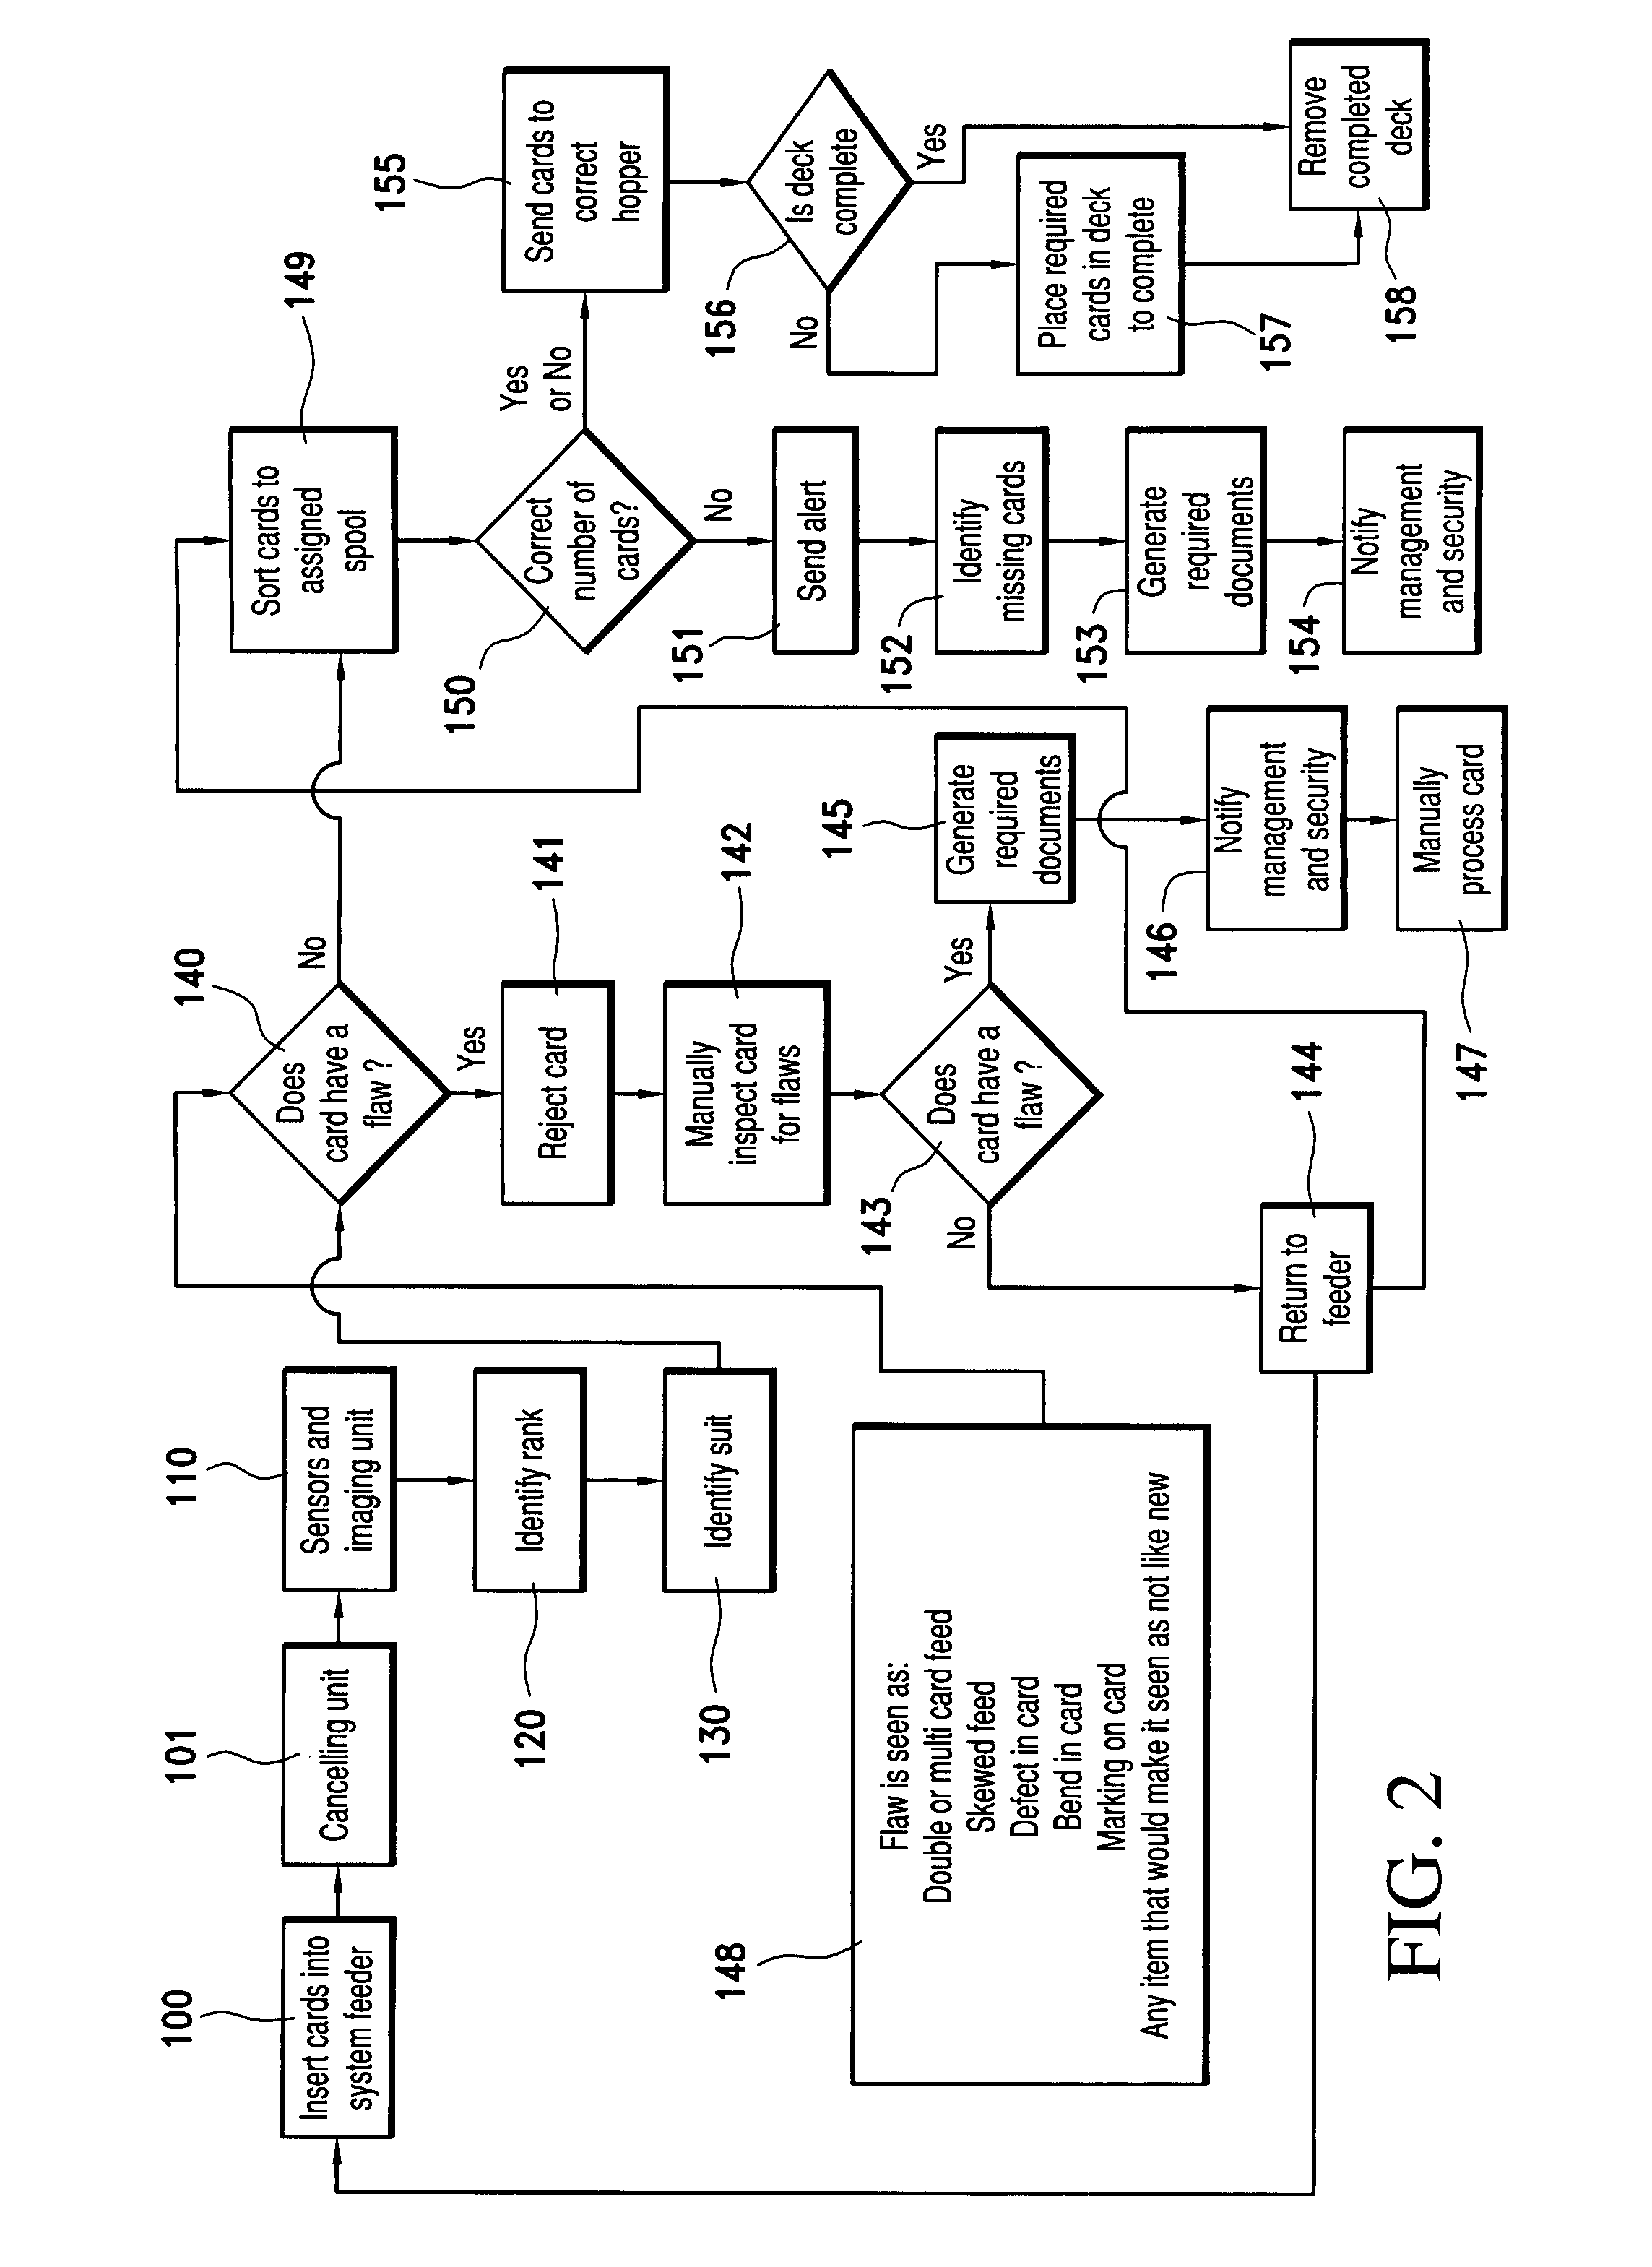 Playing card sorter and cancelling apparatus